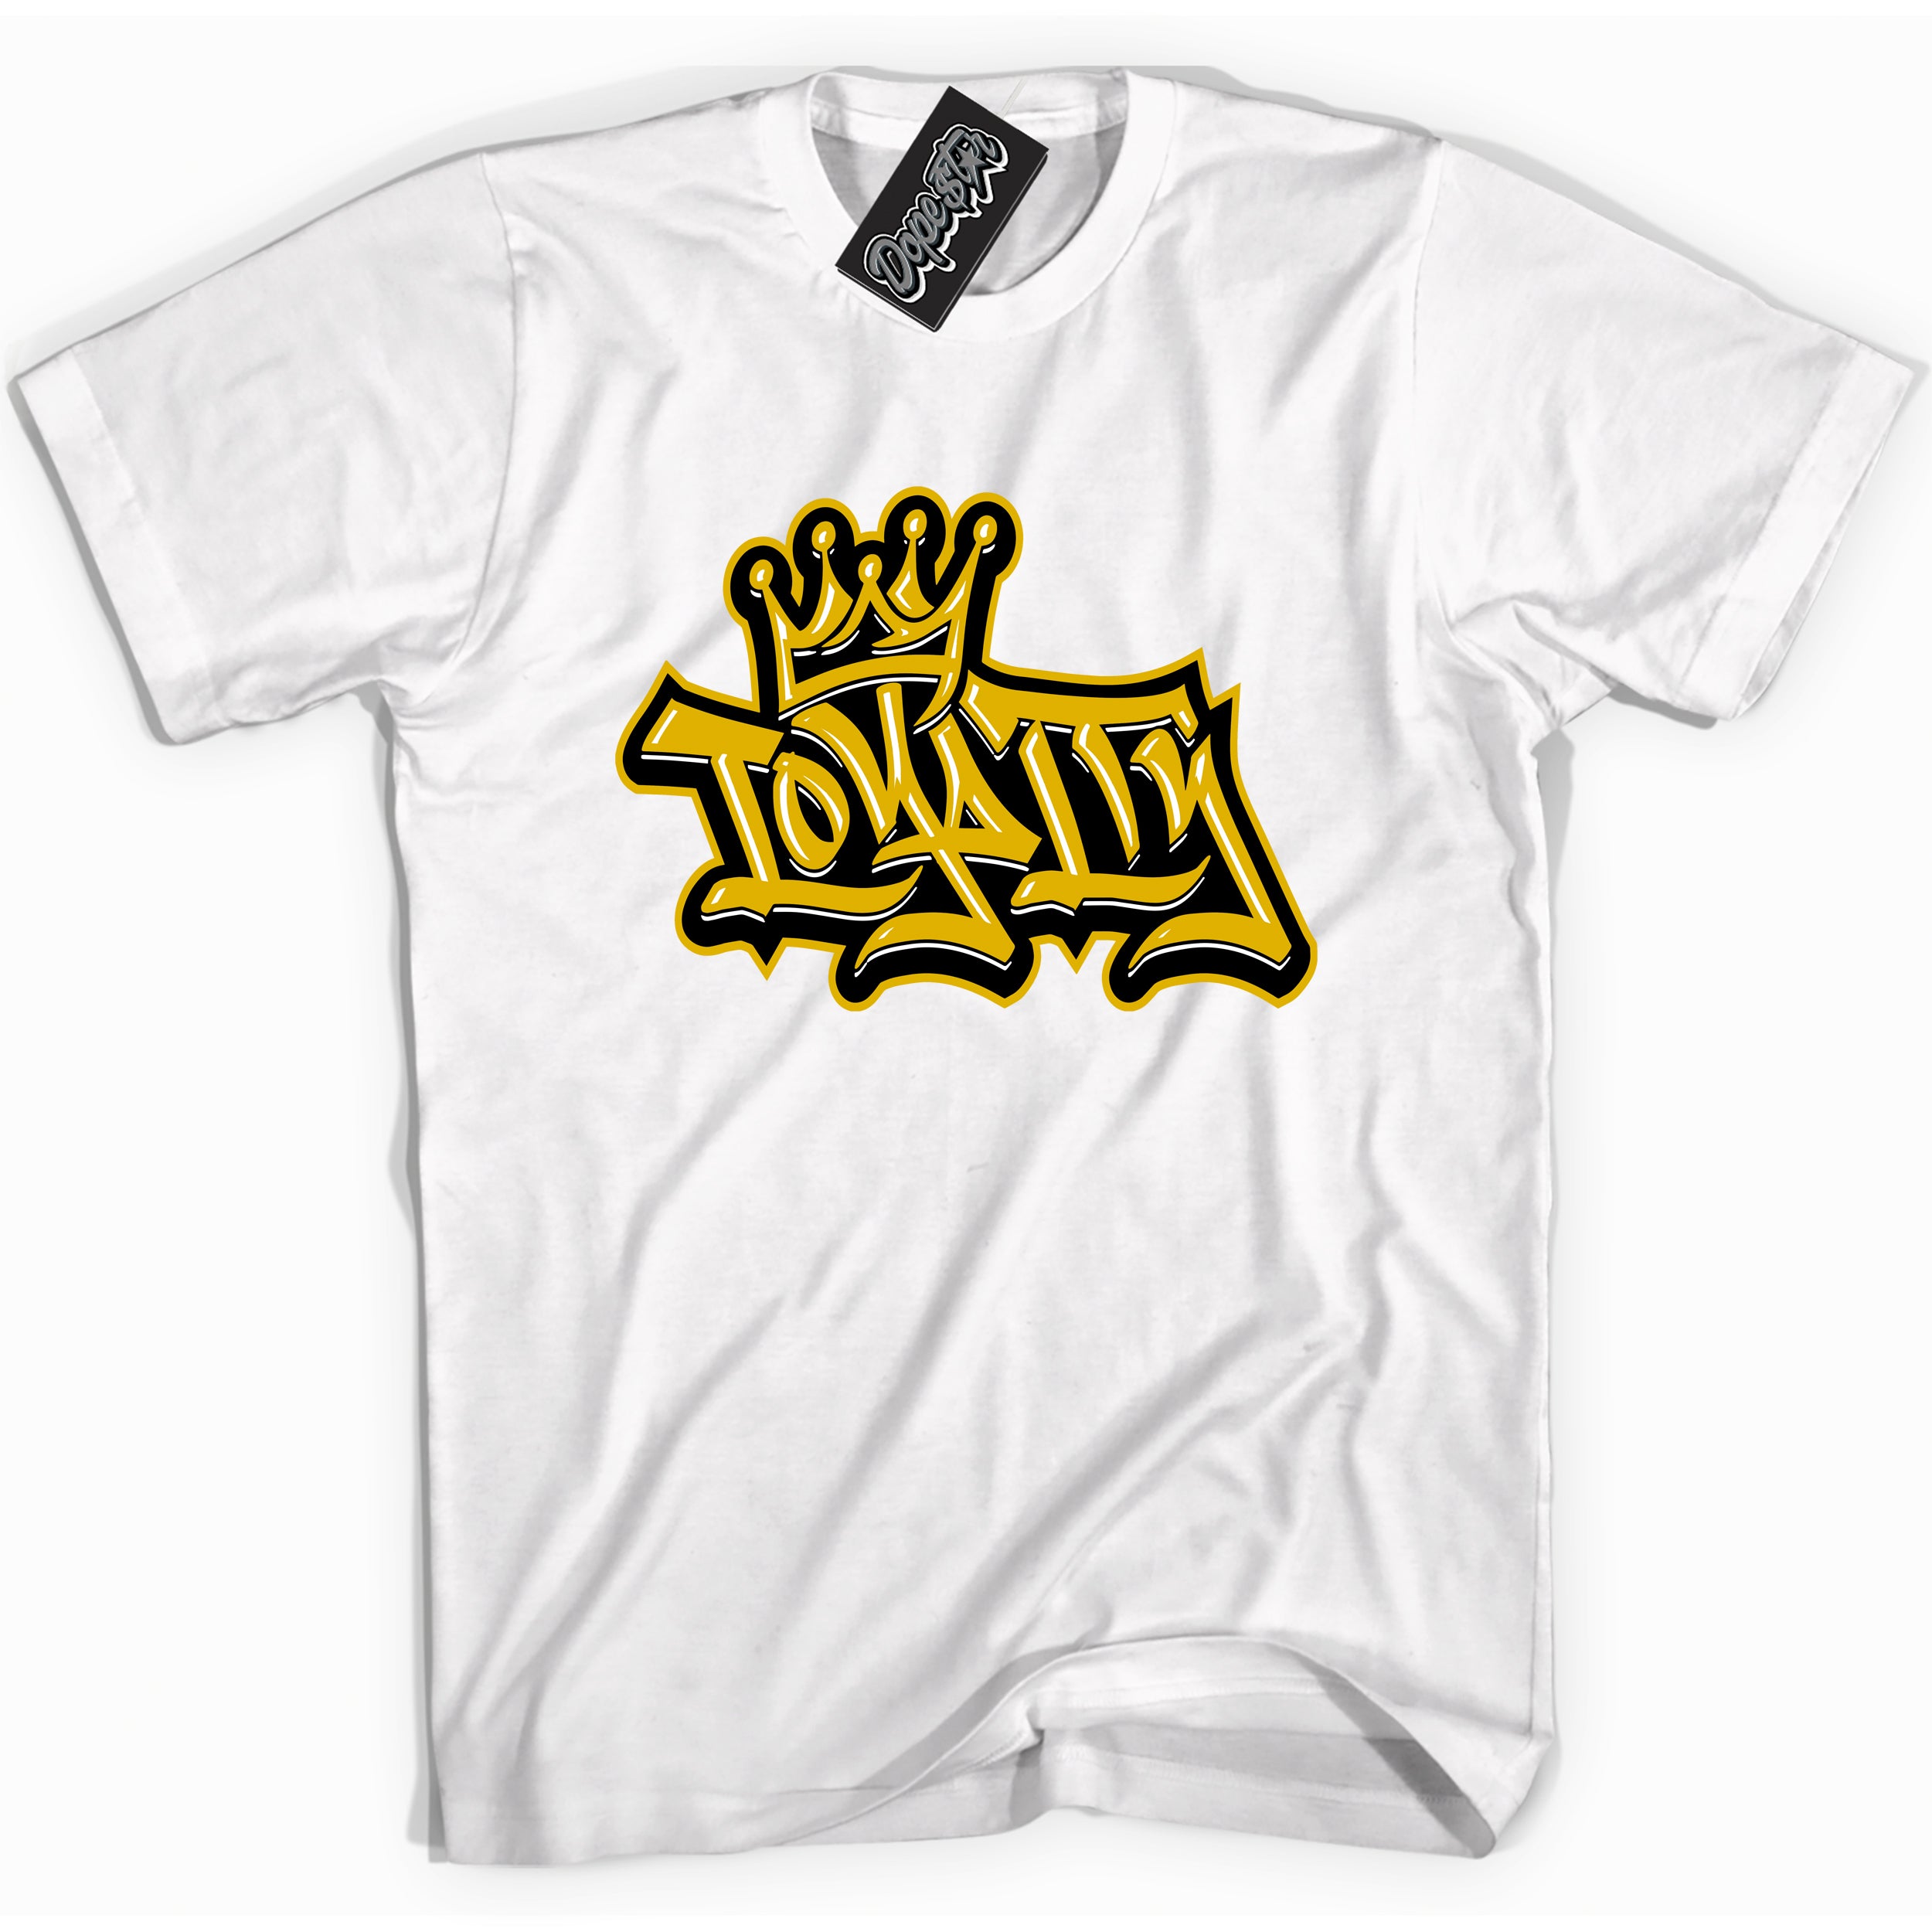 Cool White Shirt with “ Loyalty Crown ” design that perfectly matches Yellow Ochre 6s Sneakers.